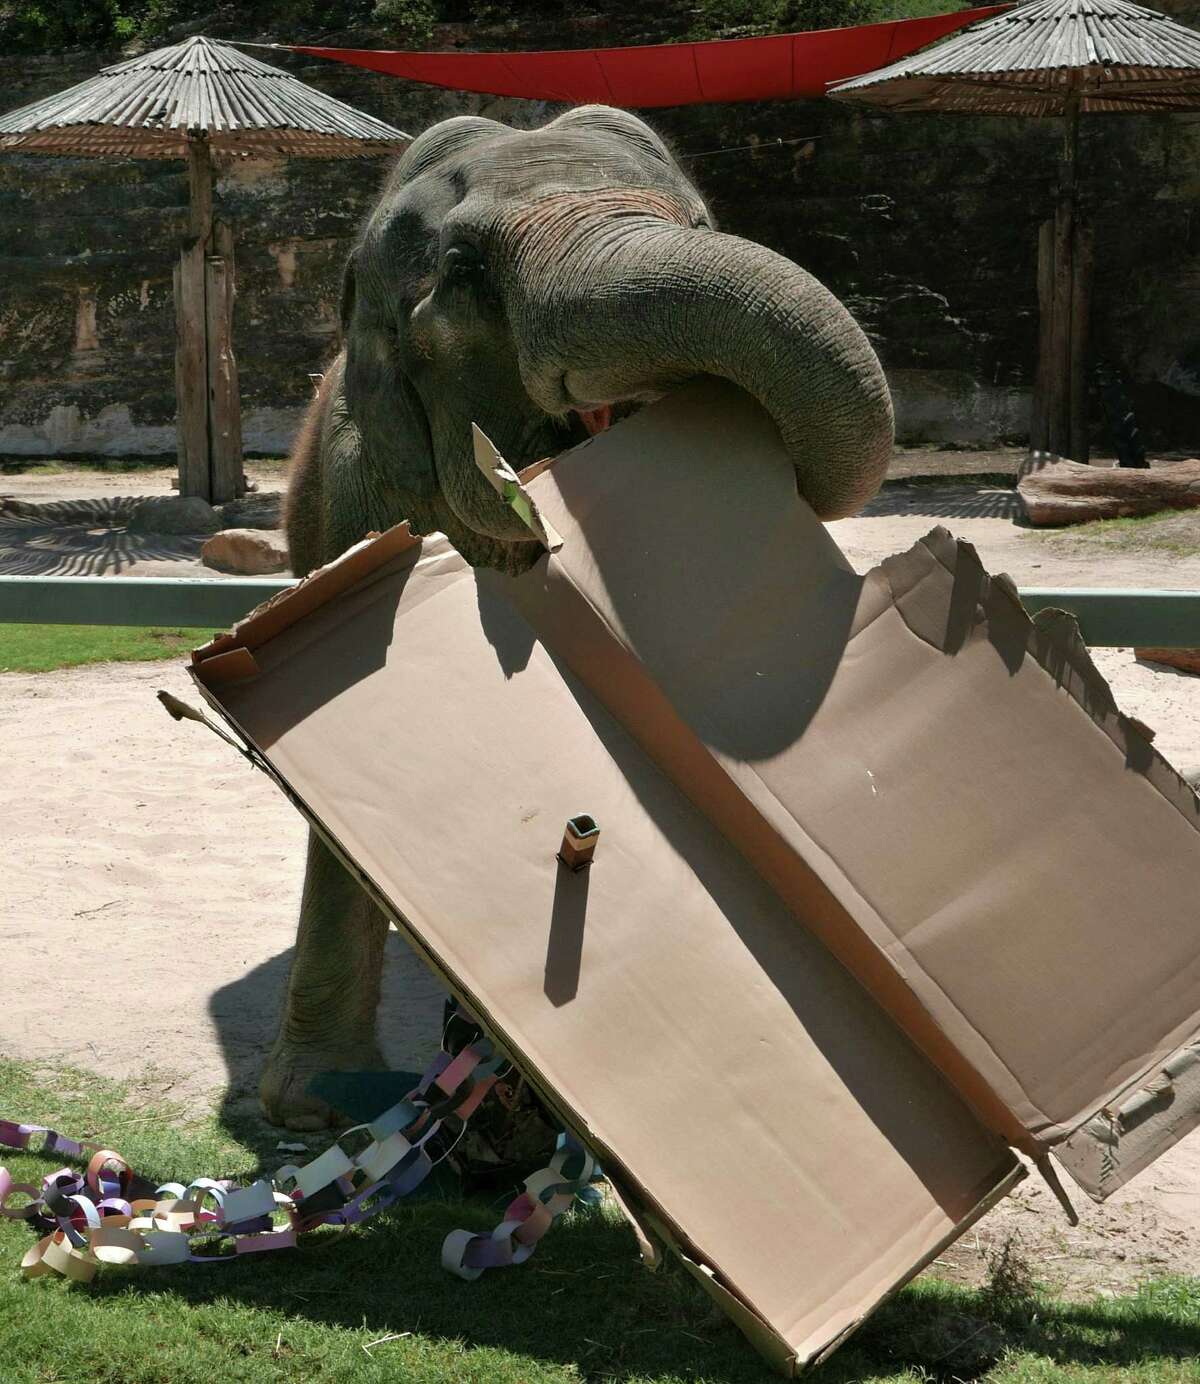 Lucky, the San Antonio Zoo's 56-year-old elephant, tears apart a cardboard toy made for her by children on Friday, July 22, 2016. Lucky remains active despite her years.